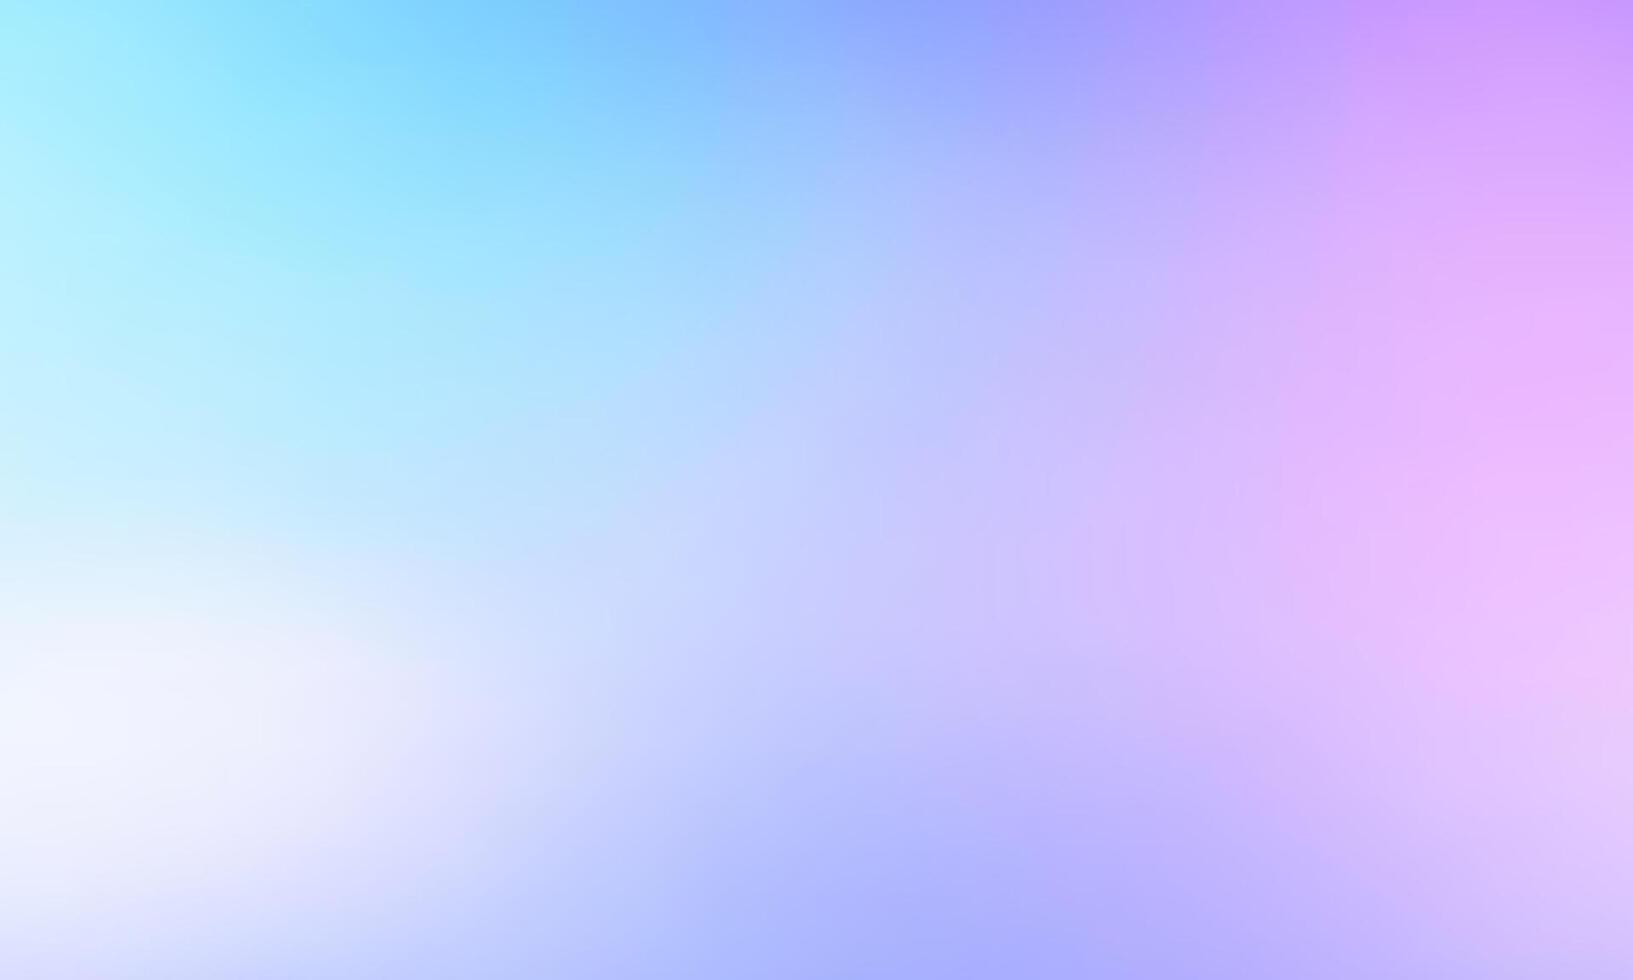 Colorful Blurred Gradient Vivid Abstract Background Design vector